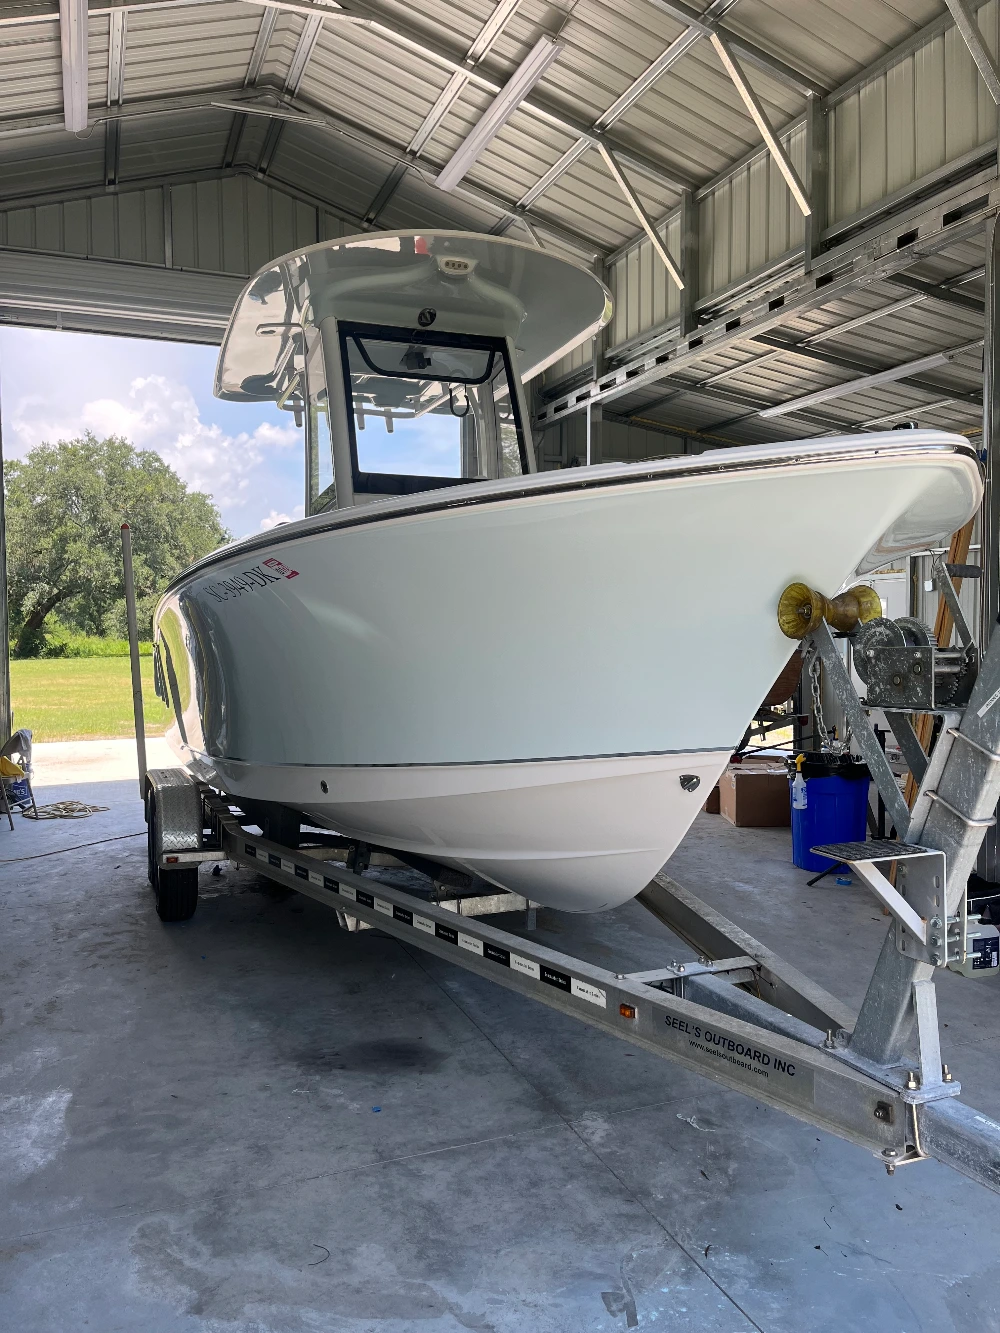 Why Should You Ceramic Coat Your Brand New Boat?